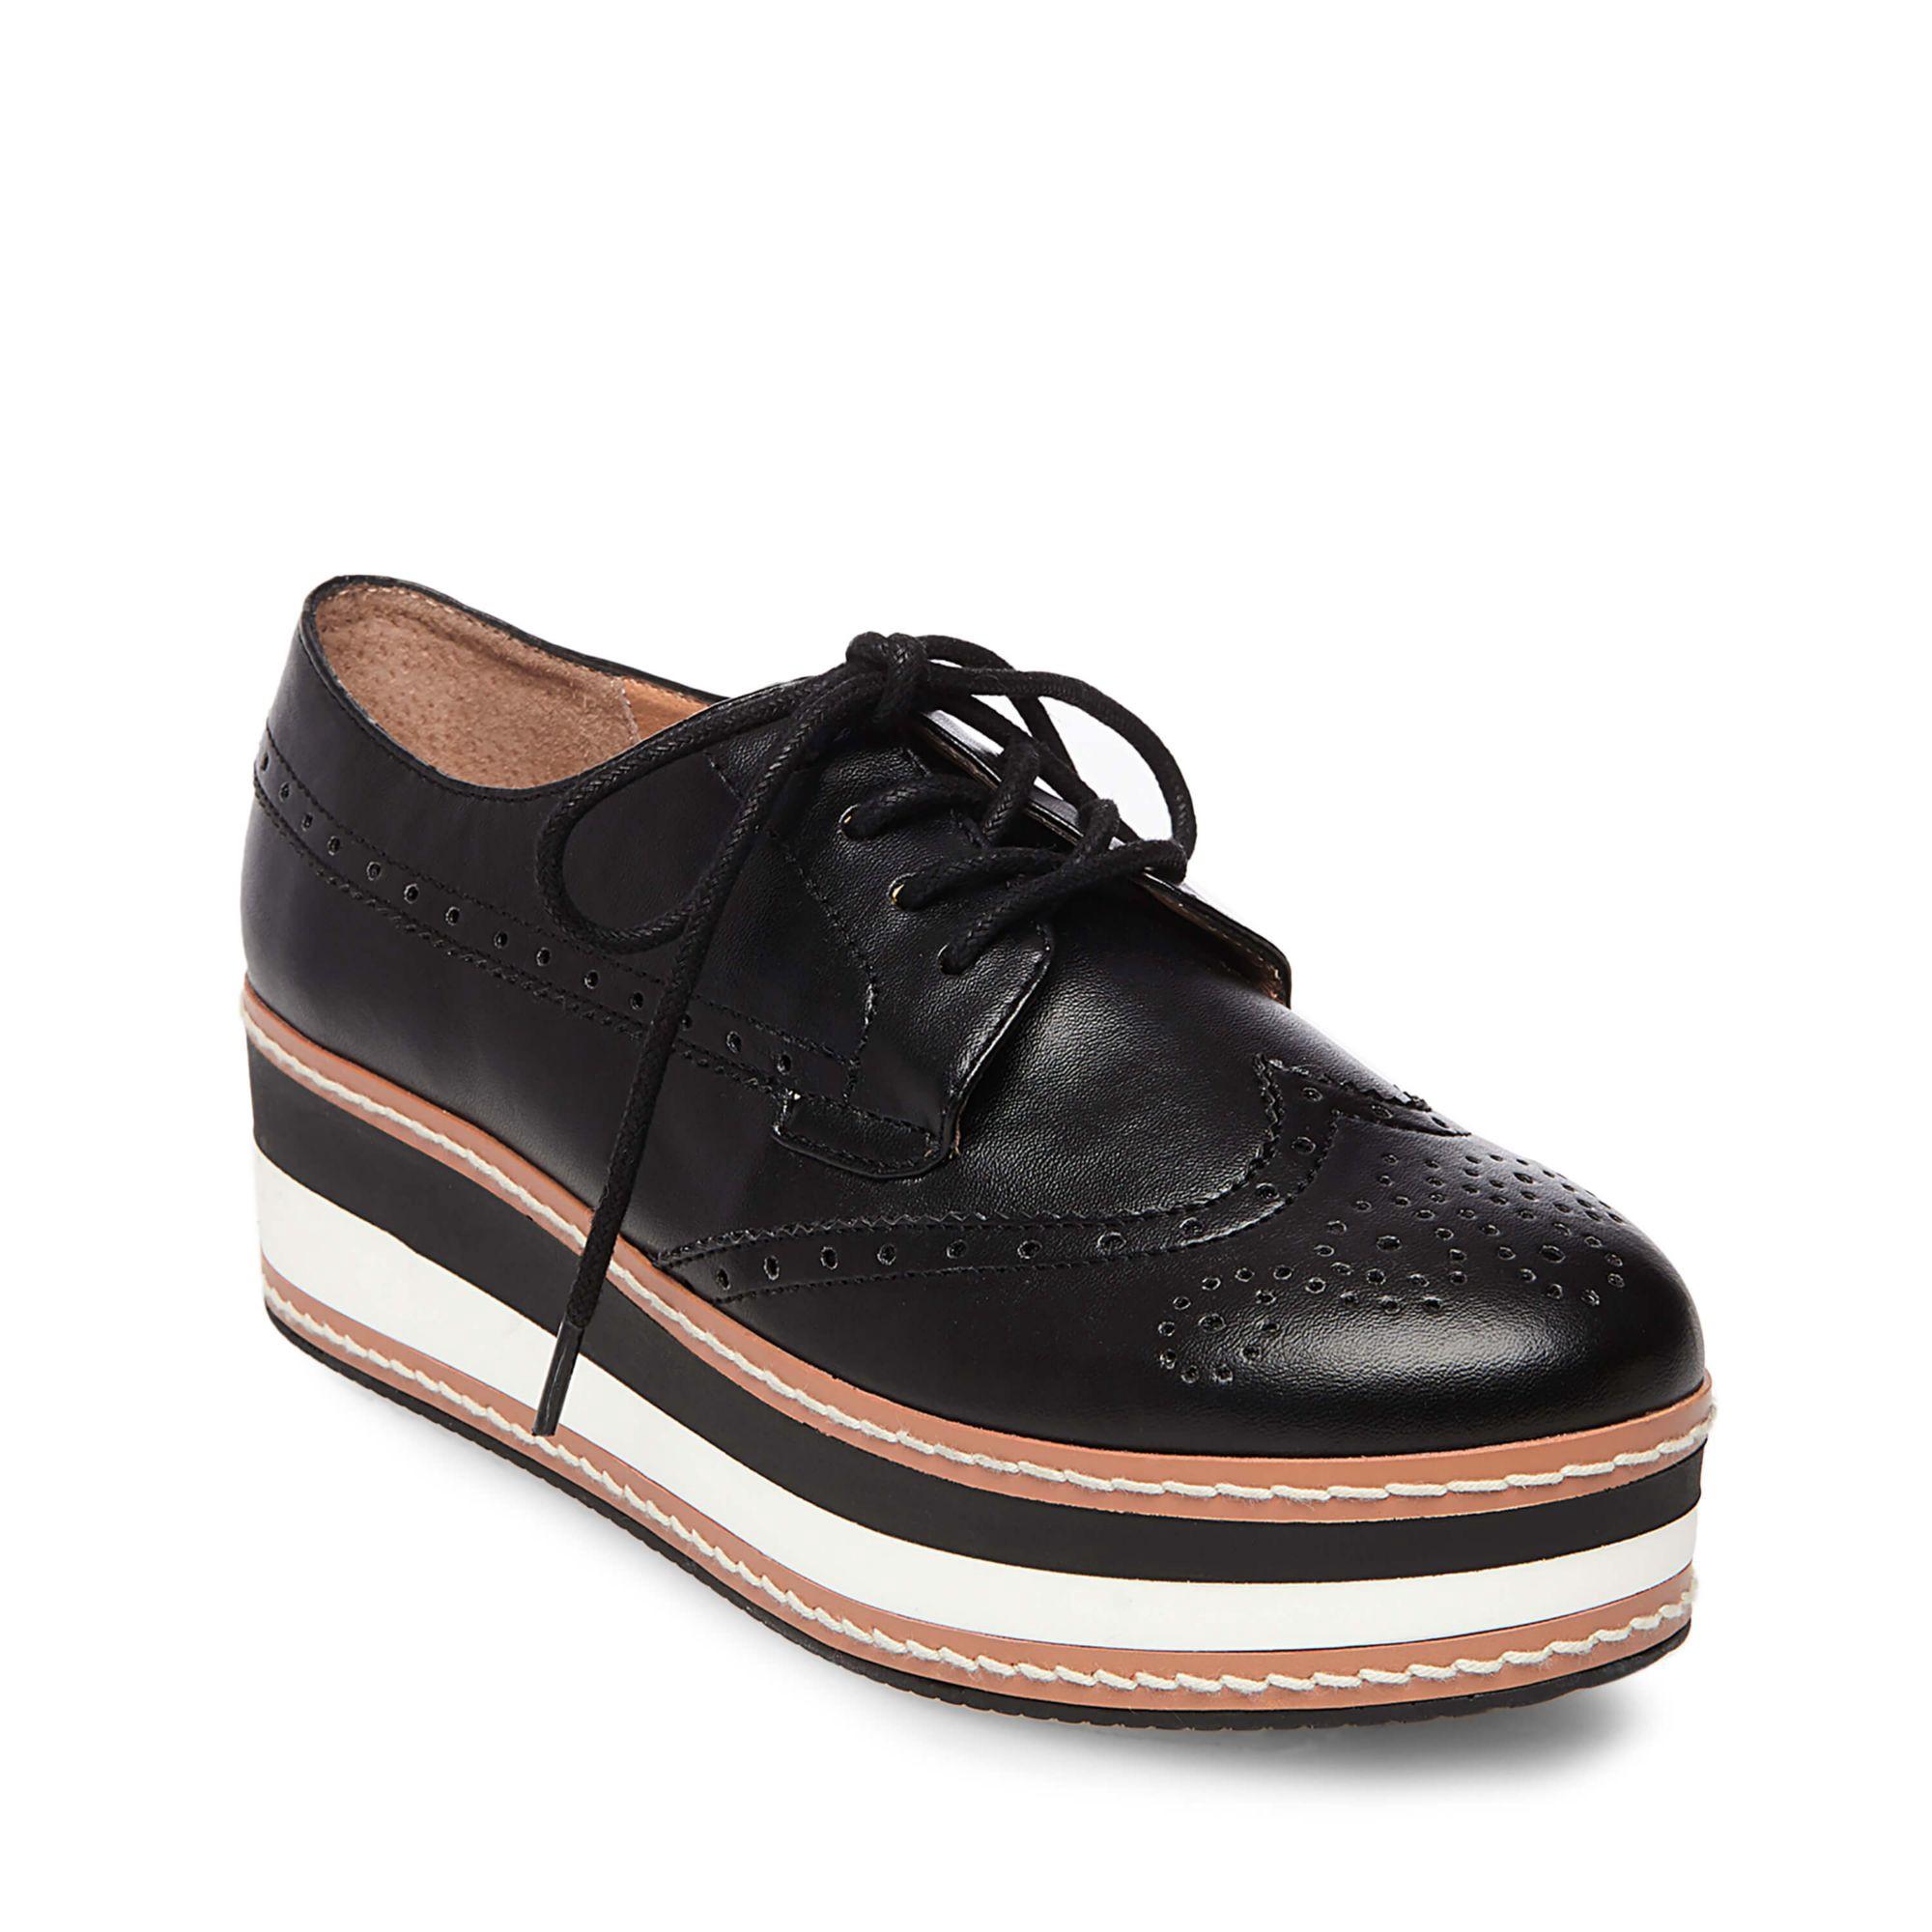 steve madden oxford shoes womens